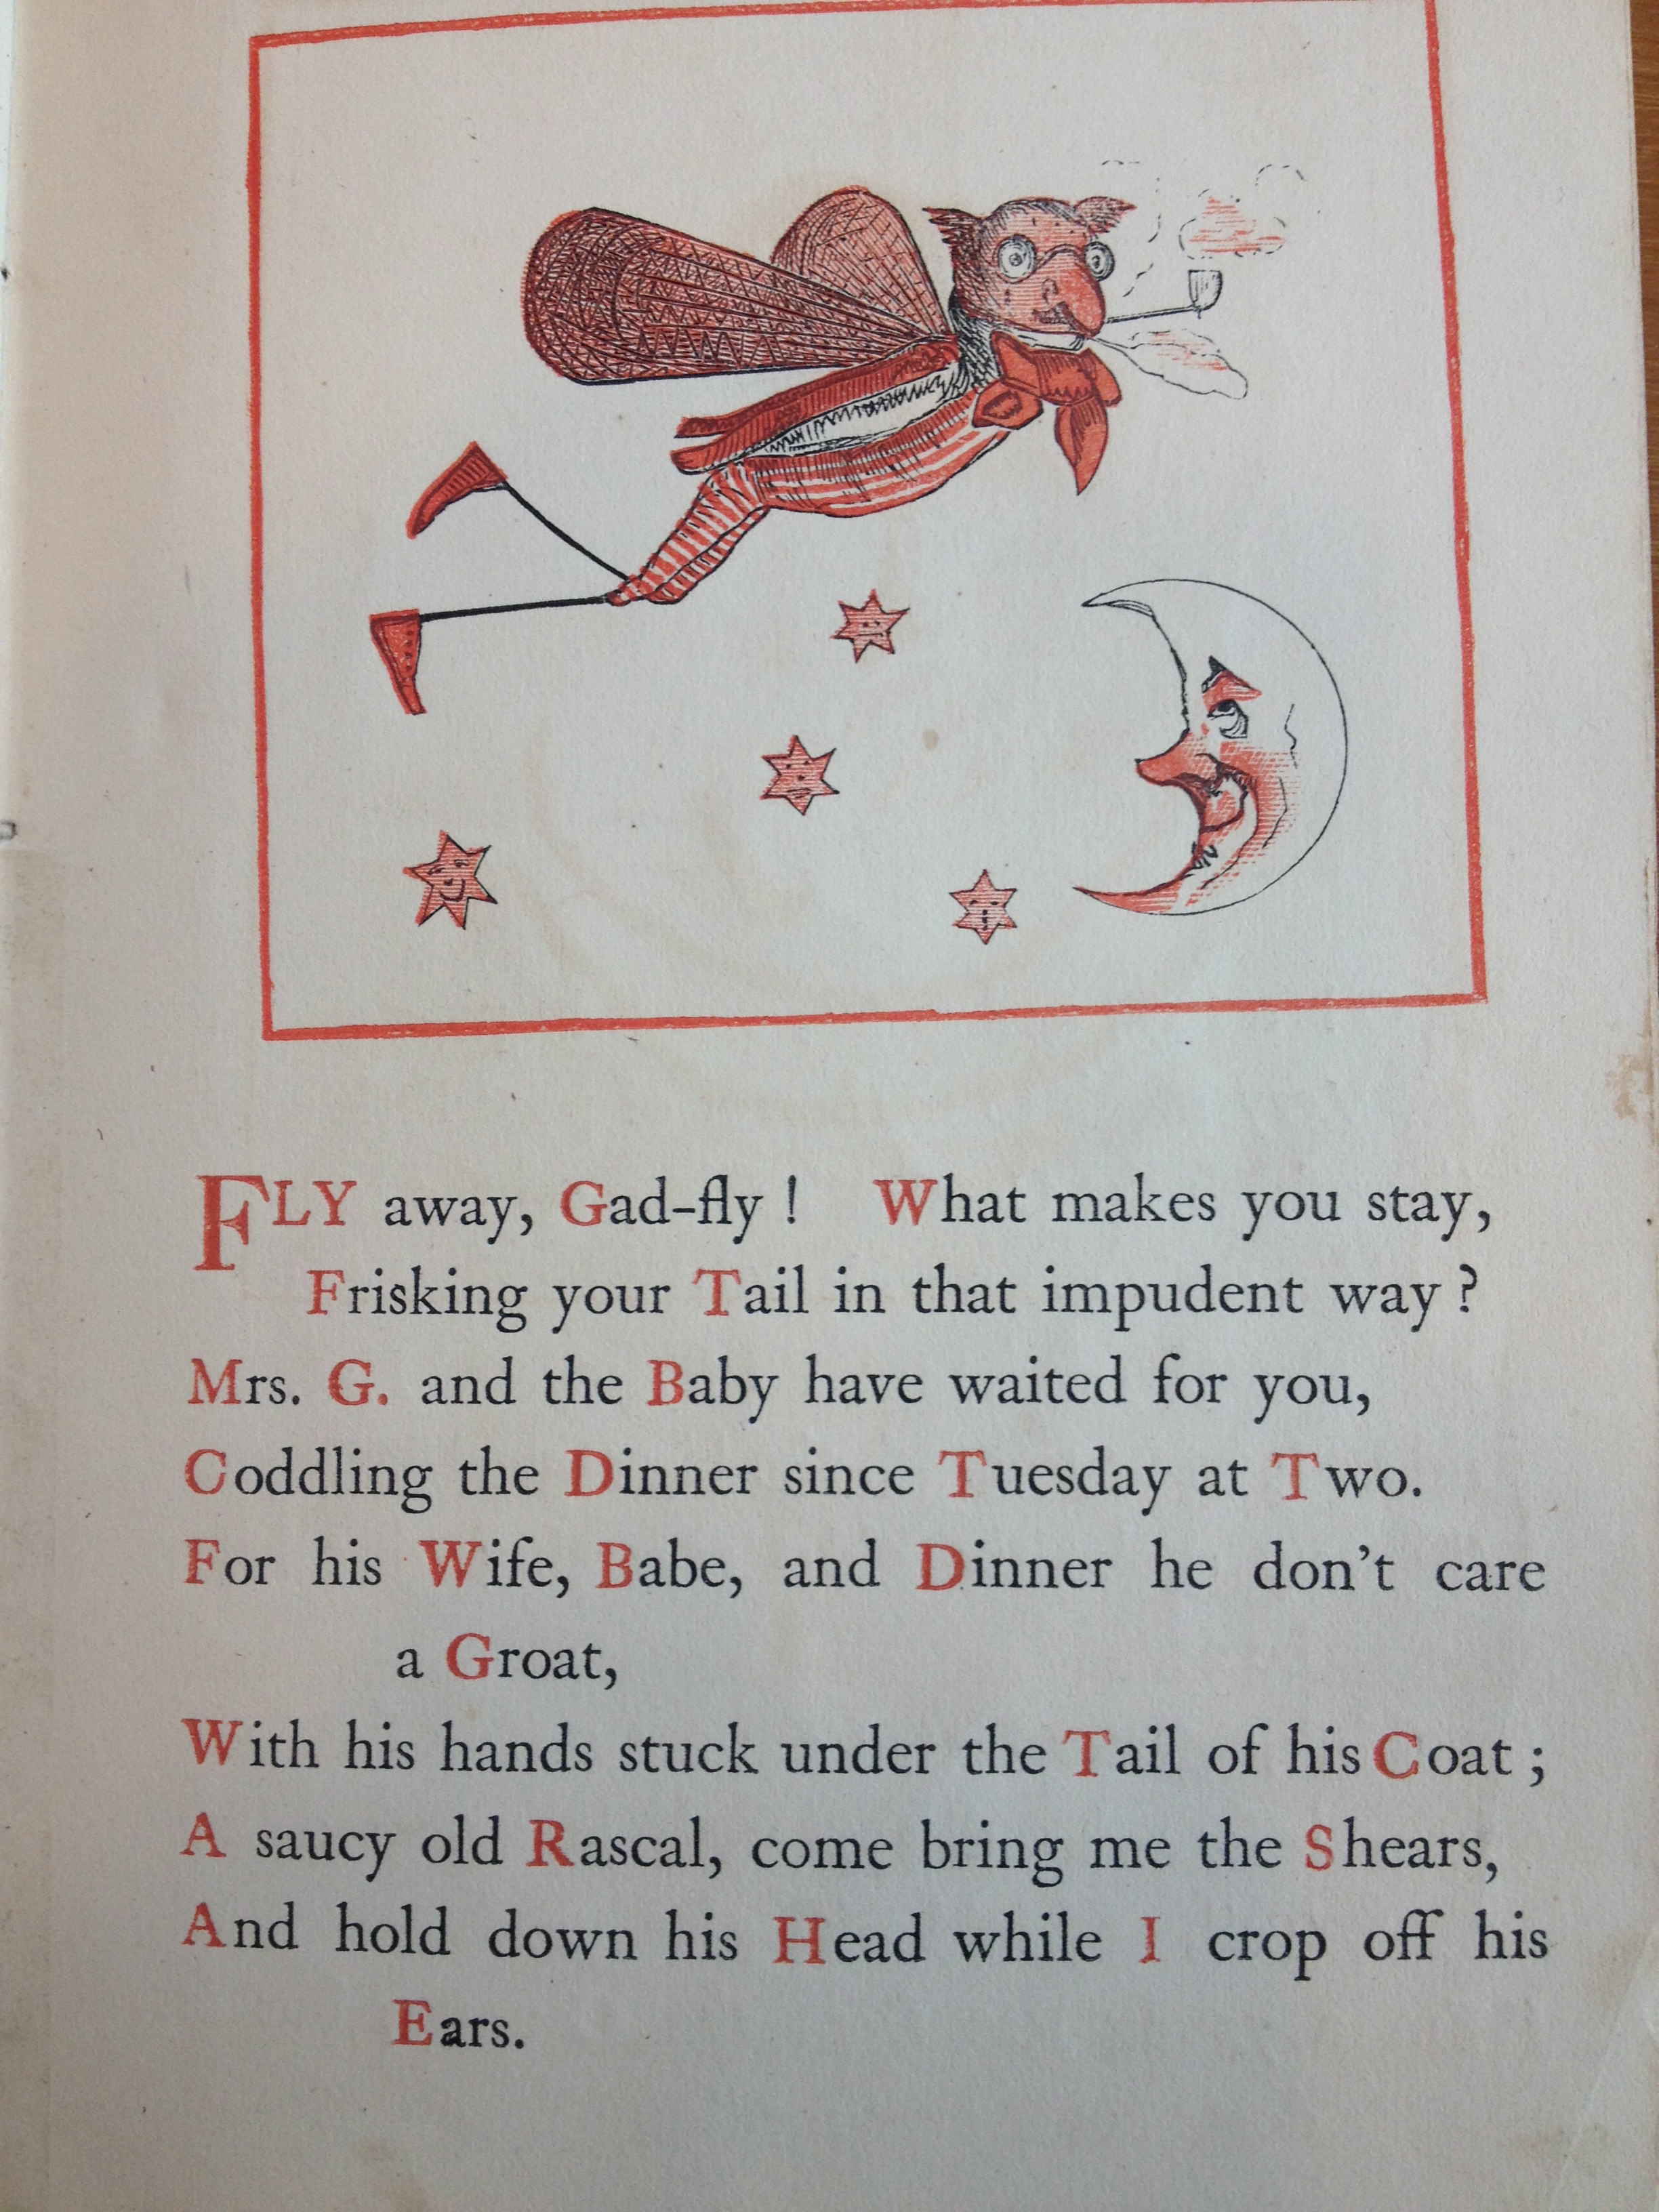 Funny rhymes! | Beinecke Rare Book & Manuscript Library